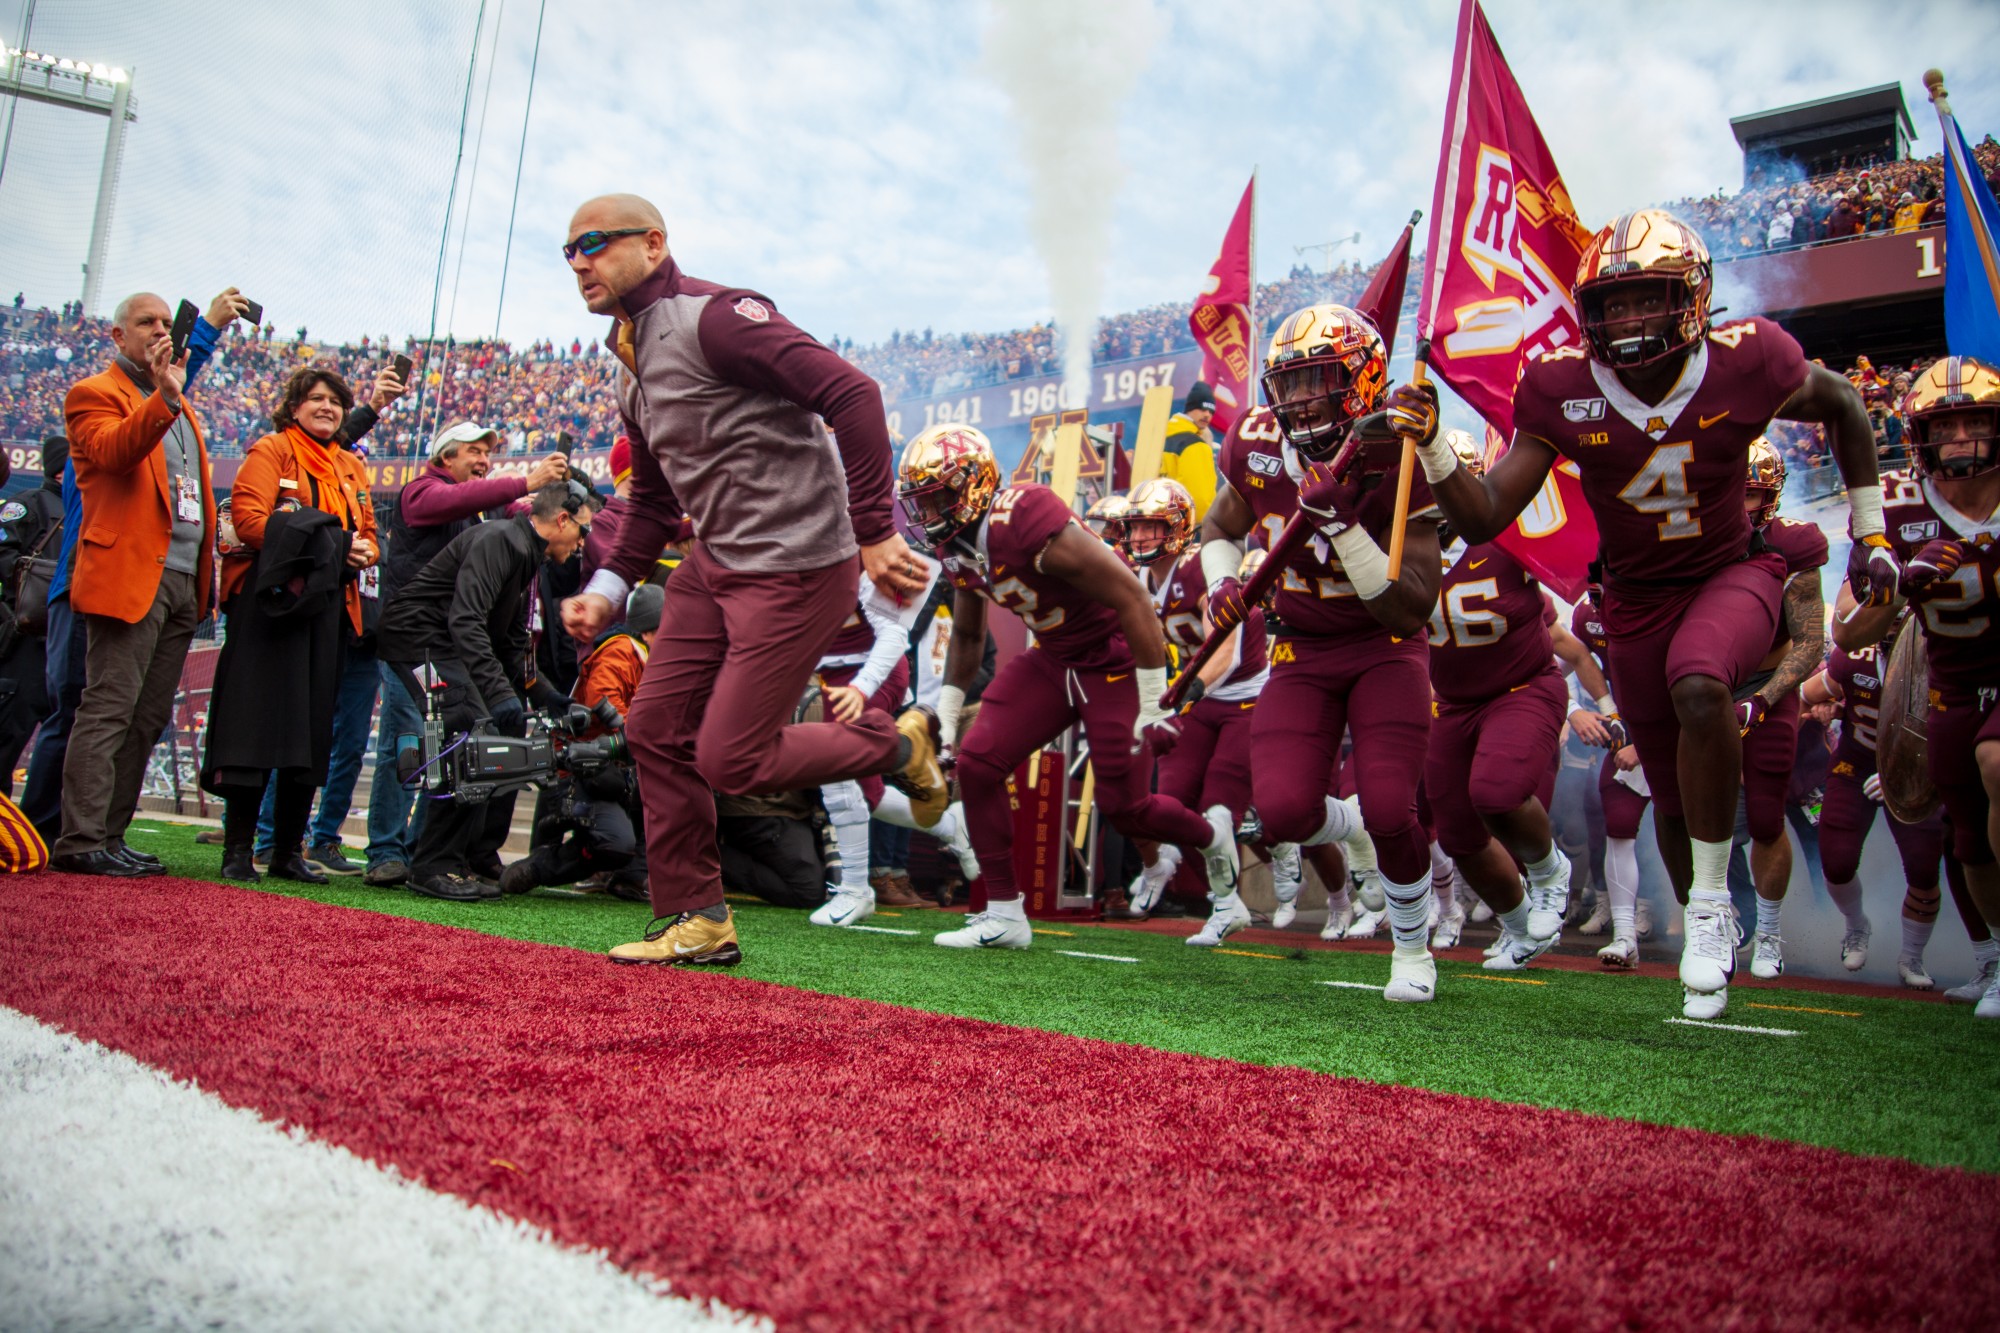 Head Coach PJ Fleck leads the team out of the tunnel at TCF Bank Stadium on Saturday, Nov. 9. The Gophers defeated Penn State 31-26 to bring their record to 9-0. A first since 1904. 